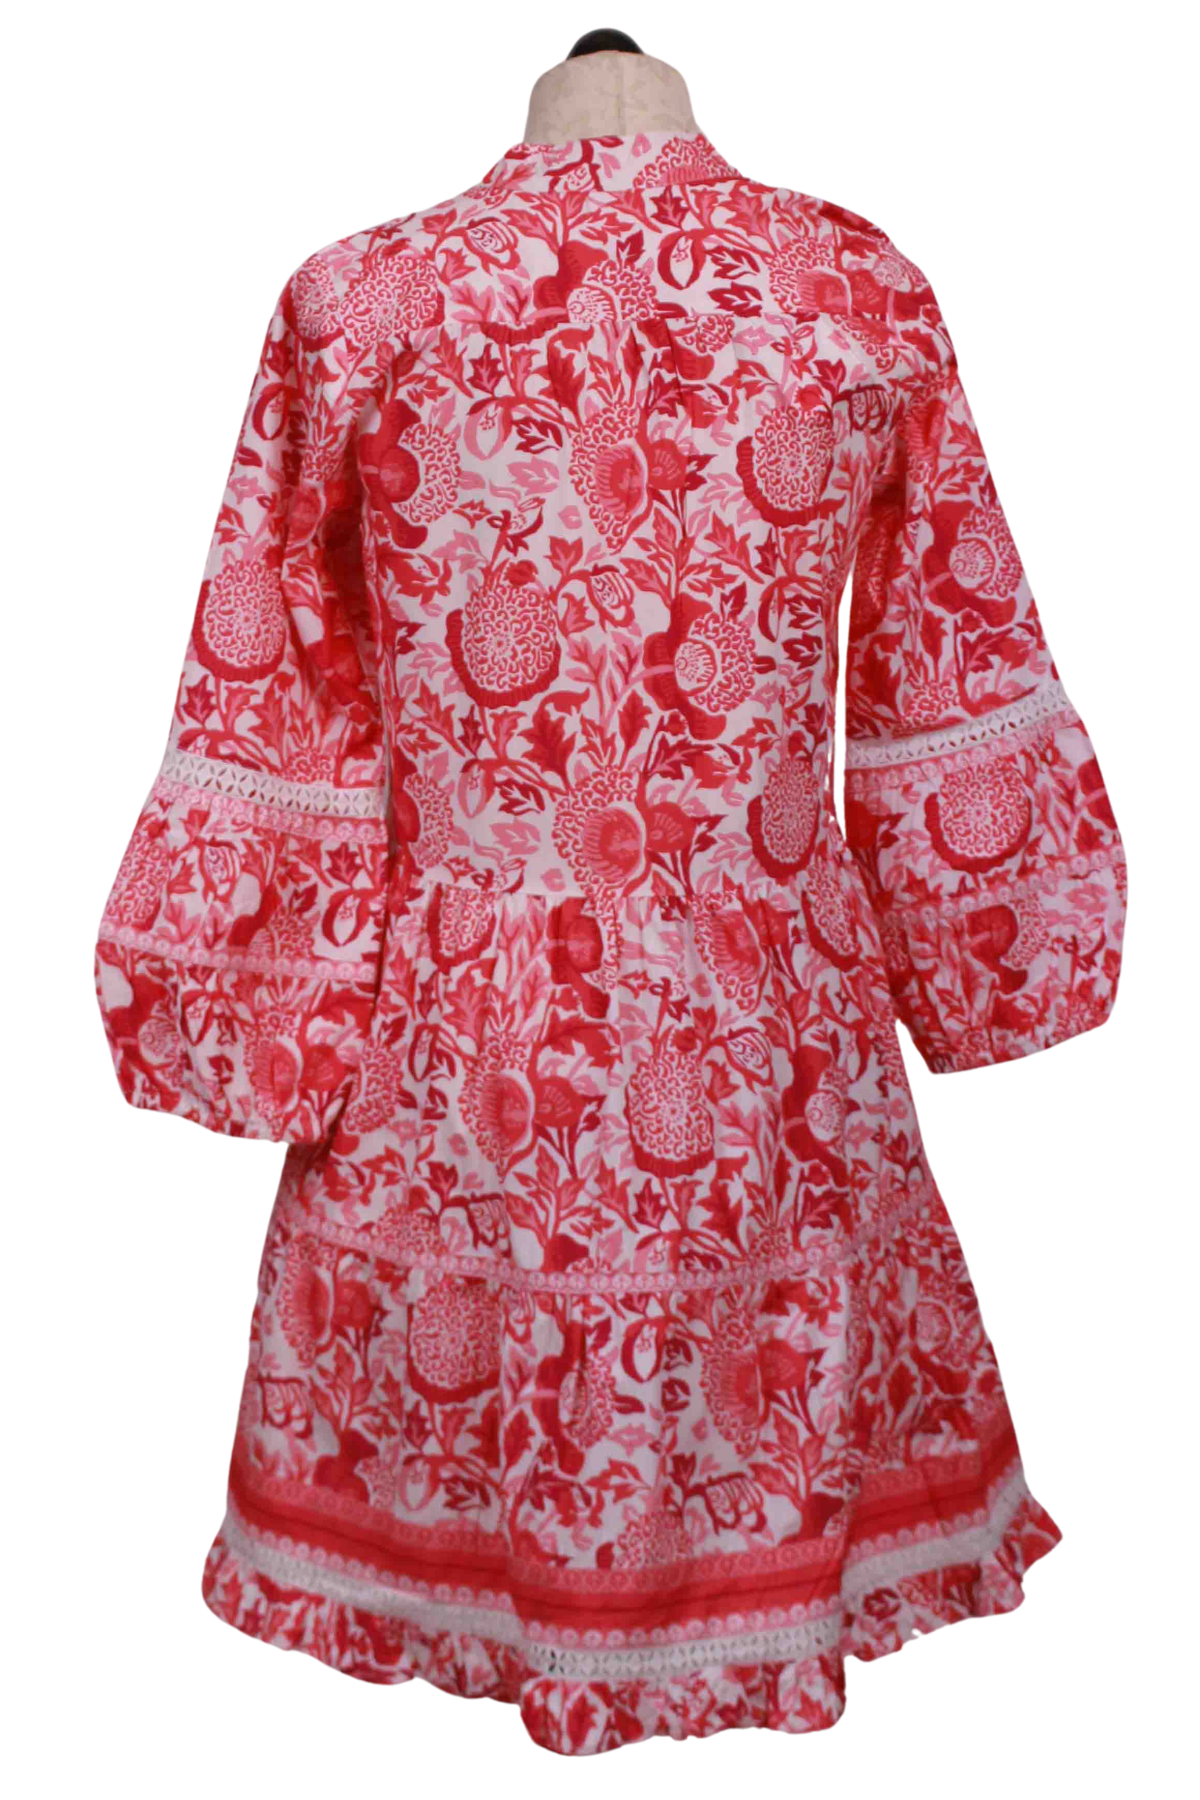 back view of White and pink Floral Block Alison Long Sleeve Dress by La Plage